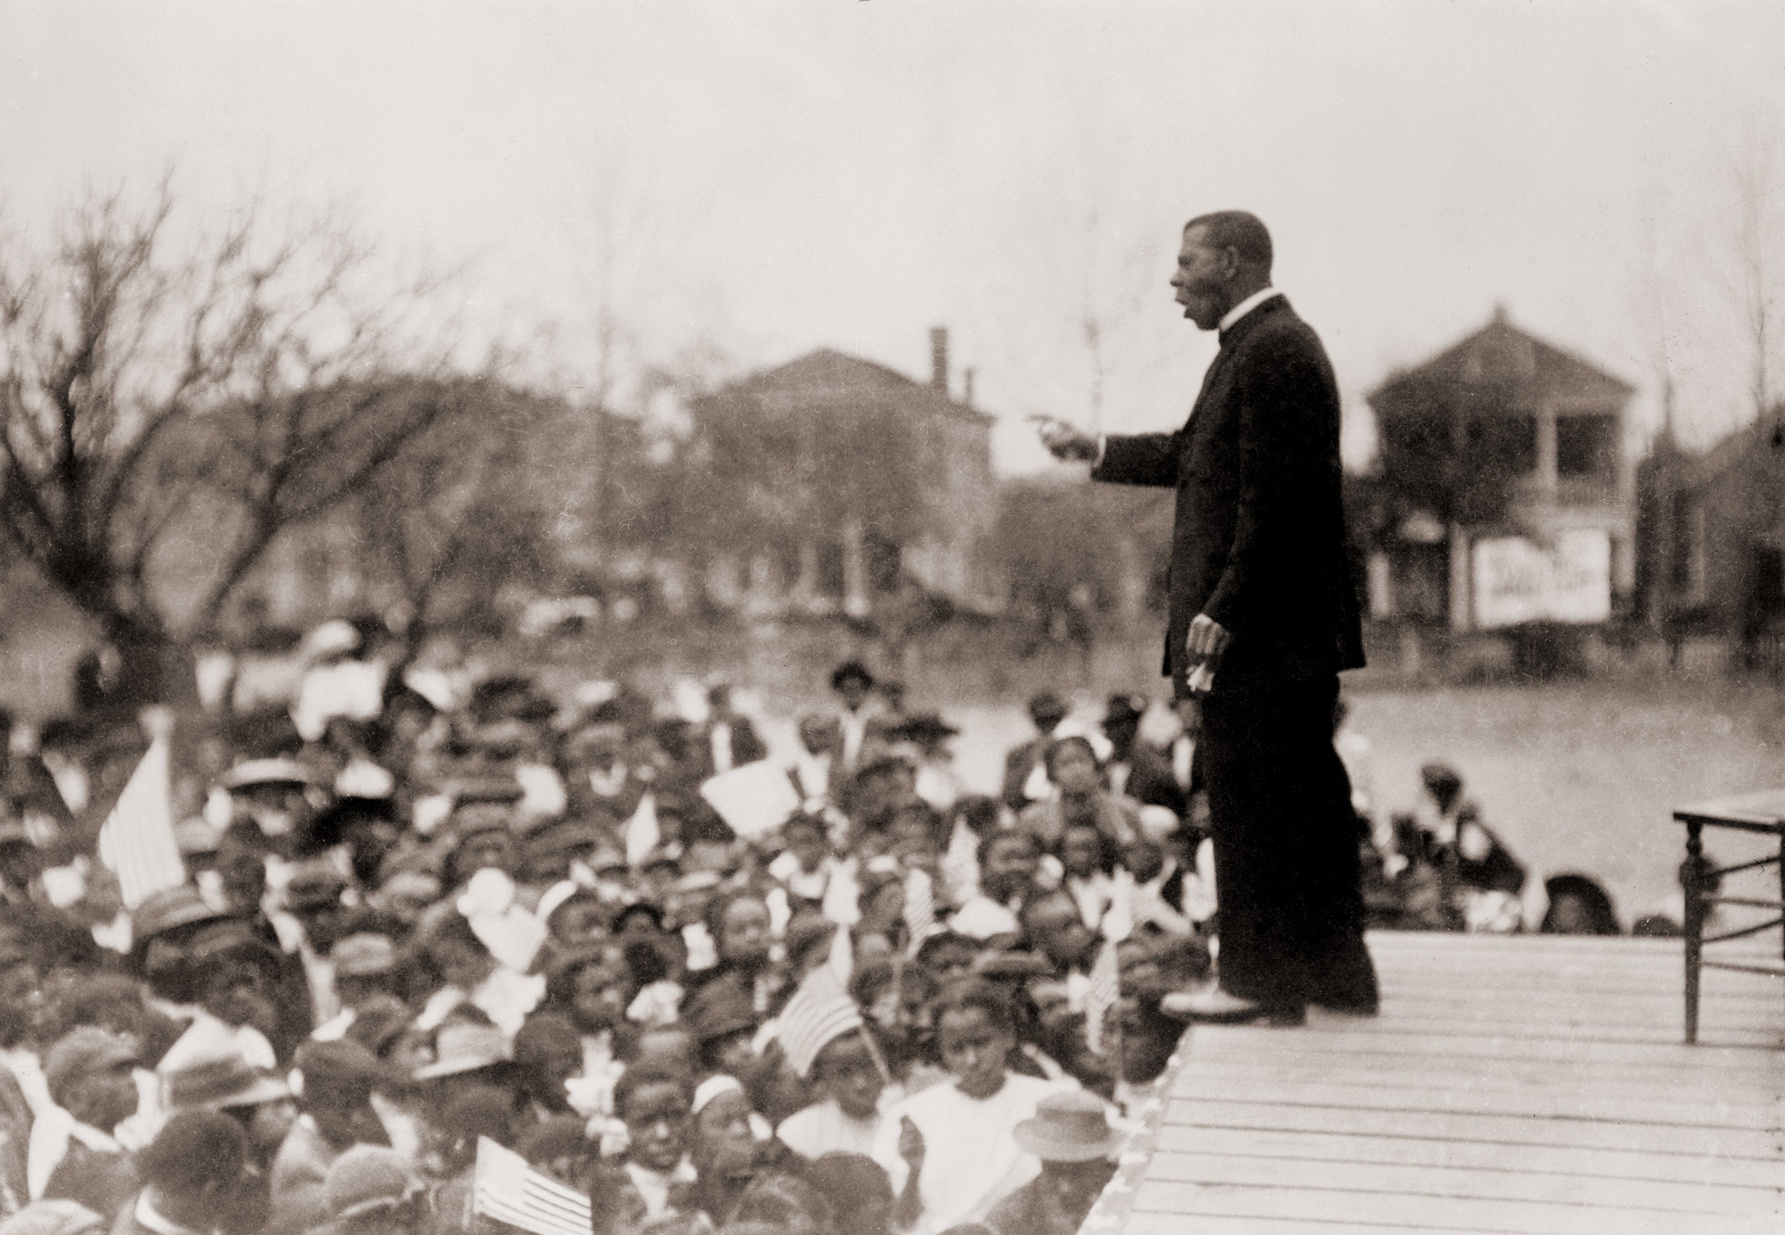 Booker T. Washington (1856-1915), speaking to an African American school children. While he was the best known African American leader of his day, he was criticized by younger leaders, such as W.E.B. DuBois, for not challenging the racist status quo of hi